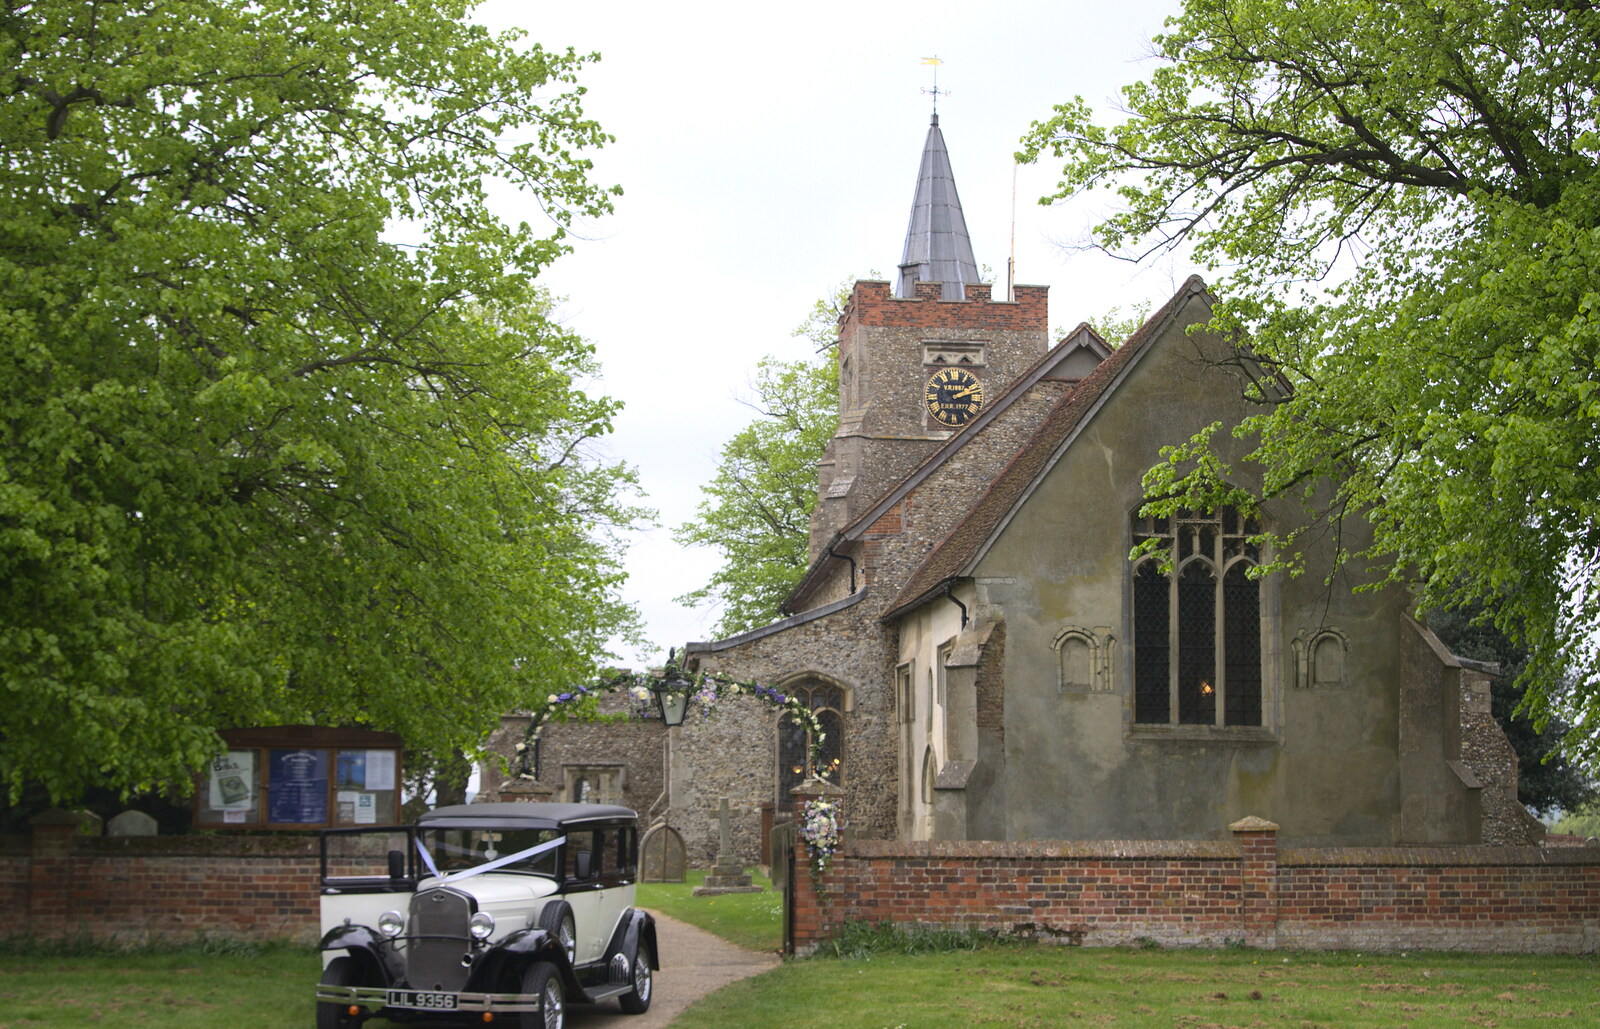 There's a wedding at St. Mary's Church from The Last-Ever BSCC Weekend Away Bike Ride, Thaxted, Essex - 6th May 2017